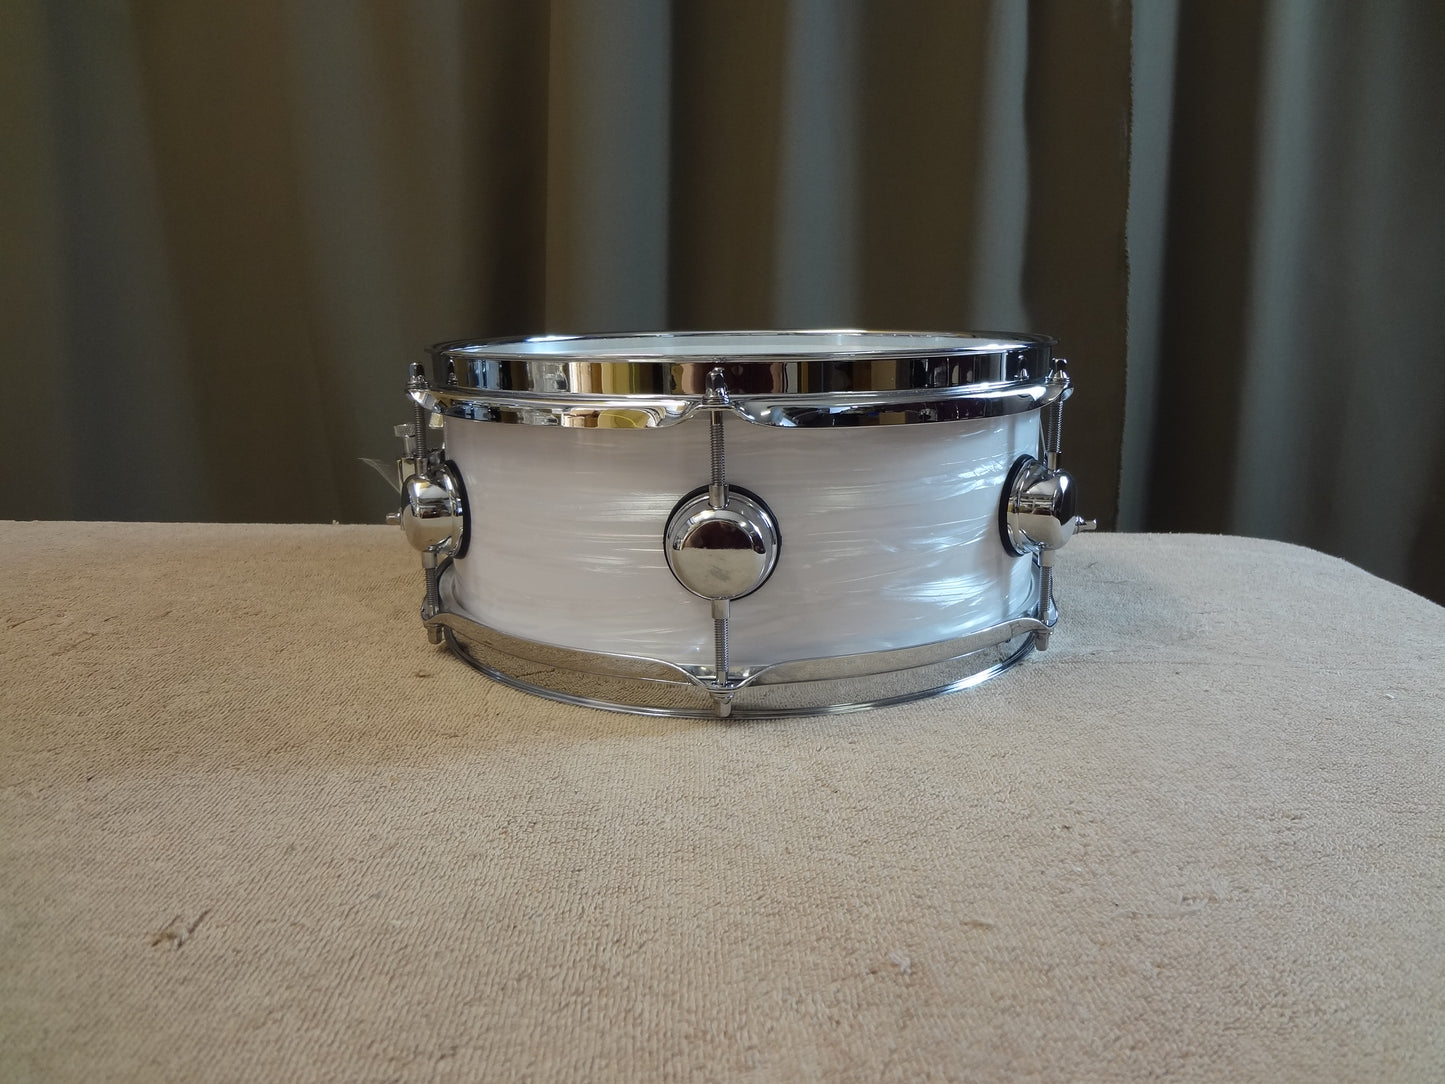 New 12 Inch Hybrid Electronic/Acoustic Snare Drum - White Oyster